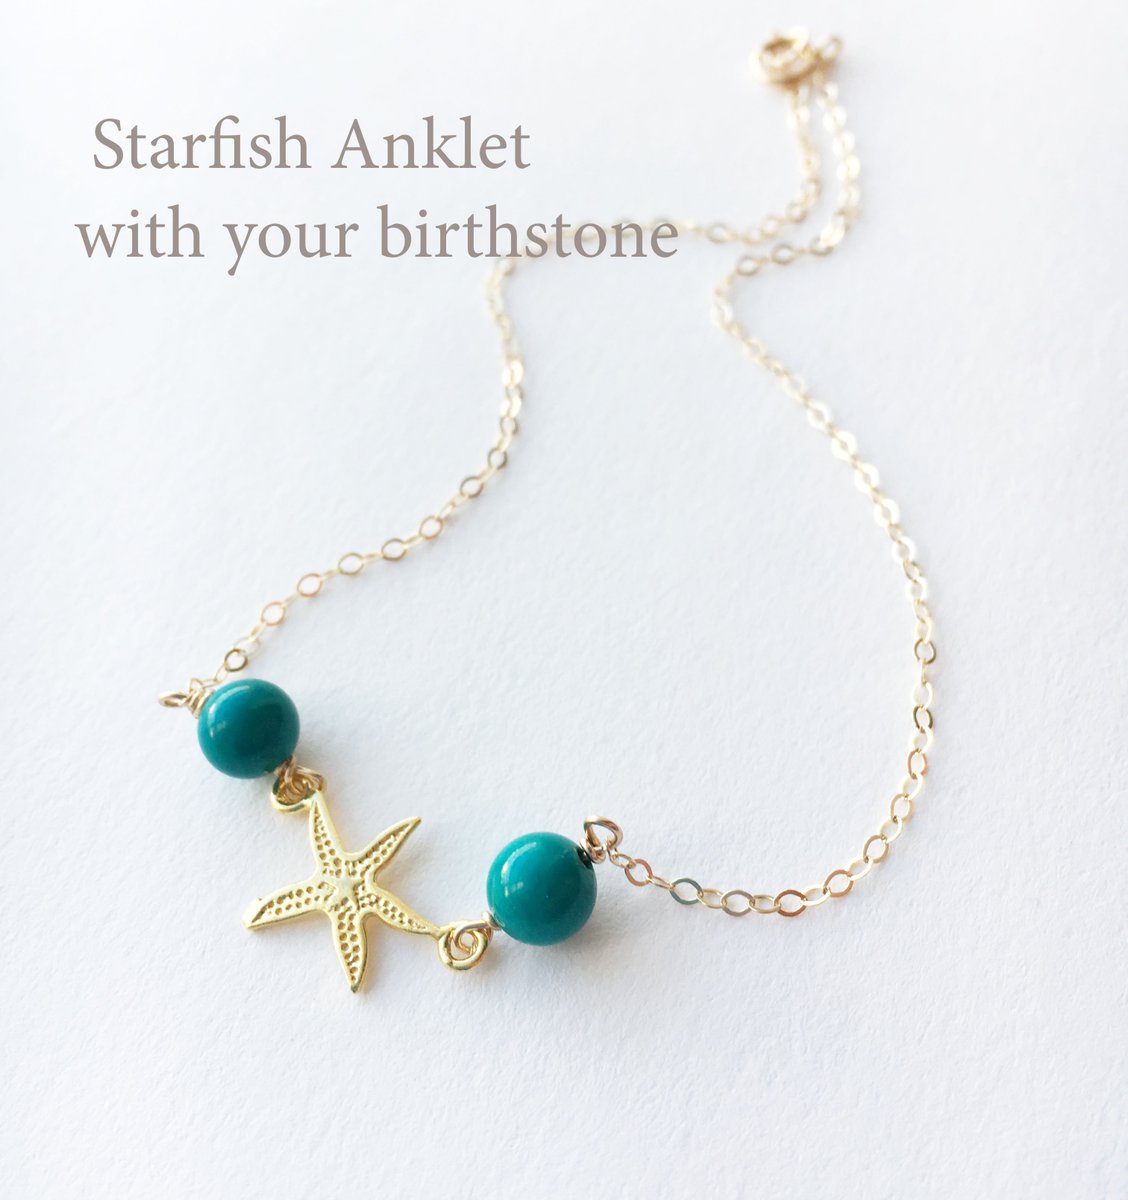 Customize our Starfish anklet 'Rhanis' ✰ by adding your birthstone : bit.ly/2DMneDr  etsy.me/2DfDPhJ
#starfishanklet #staranklet #anklet #anklebracelet #birthstoneanklet #turquoiseanklet #goldanklet #beachjewelry #bridesmaidanklet #jewelryonetsy #olizzjewelry